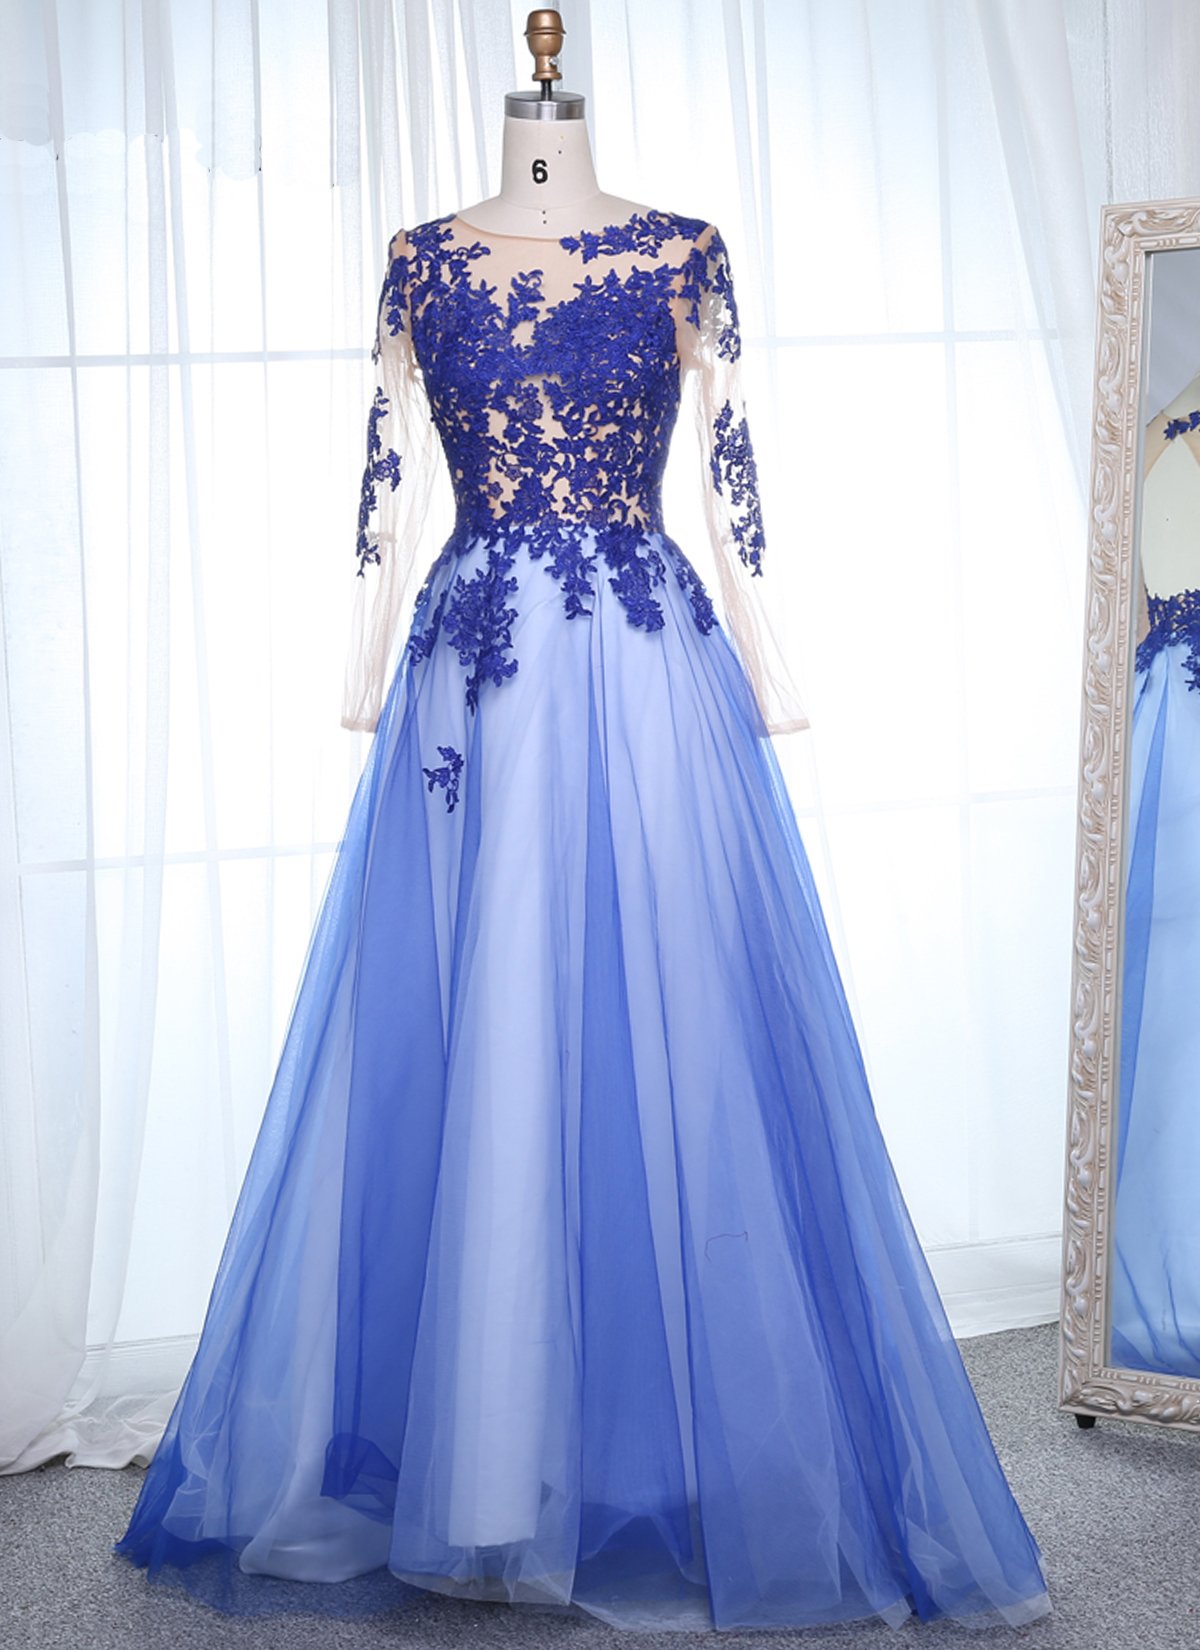 Elegant Tulle Scoop Neck Long Sleeves Appliques Lace Formal Prom Dress, Beautiful Long Prom Dress, Banquet Party Dress